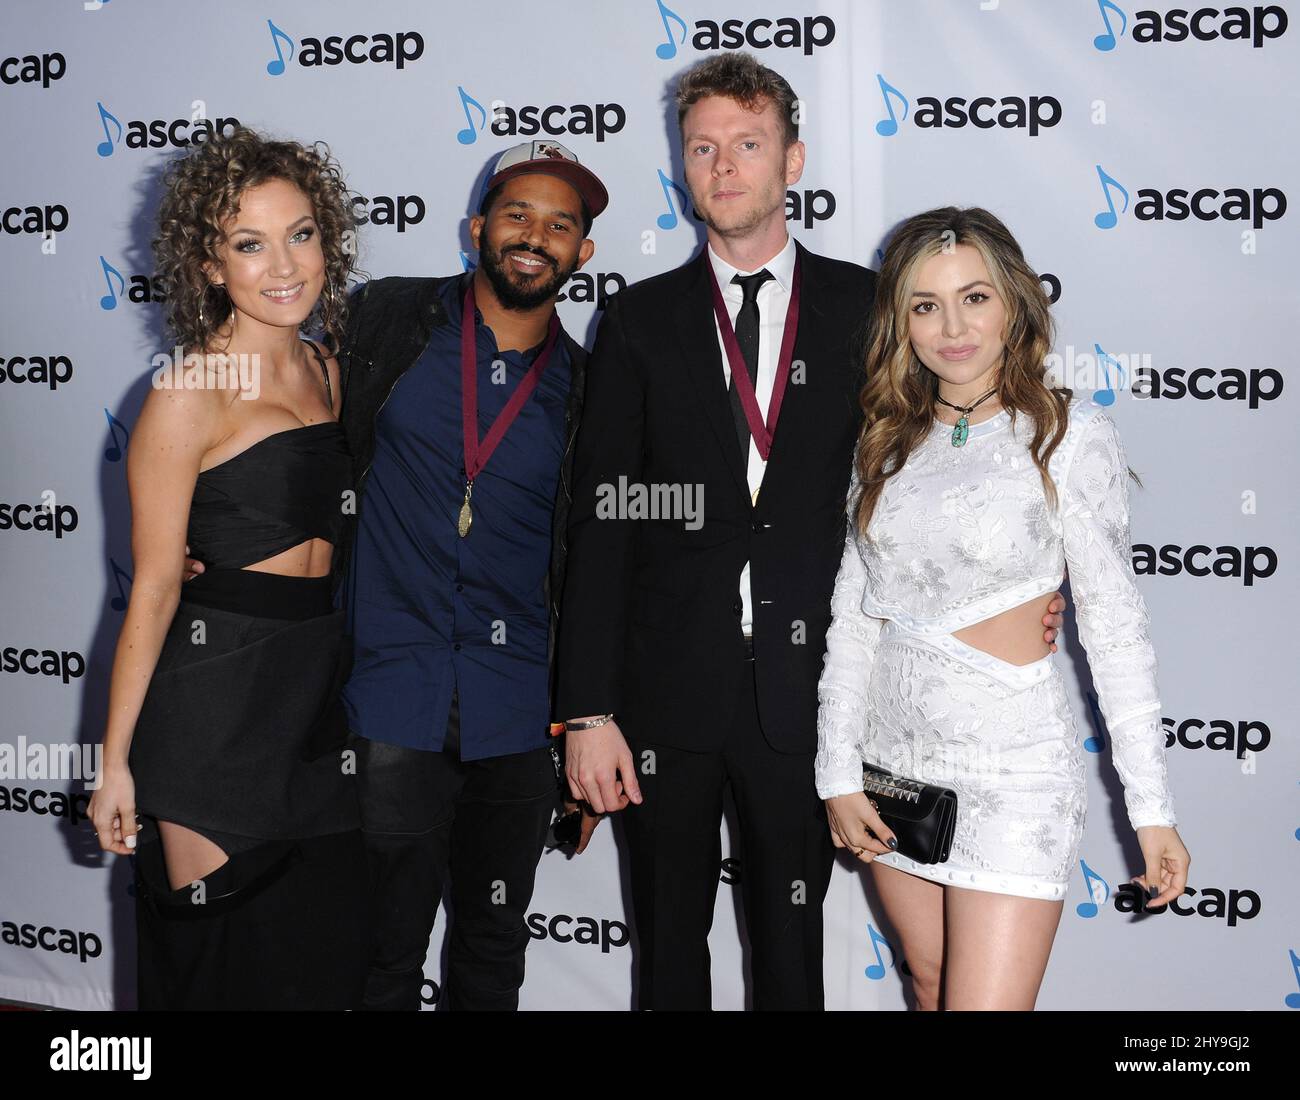 Joshua Ammo Coleman, Henry Cirkut Walter attending the 2016 ASCAP Pop Awards held at Dolby Theatre in Los Angeles, USA. Stock Photo